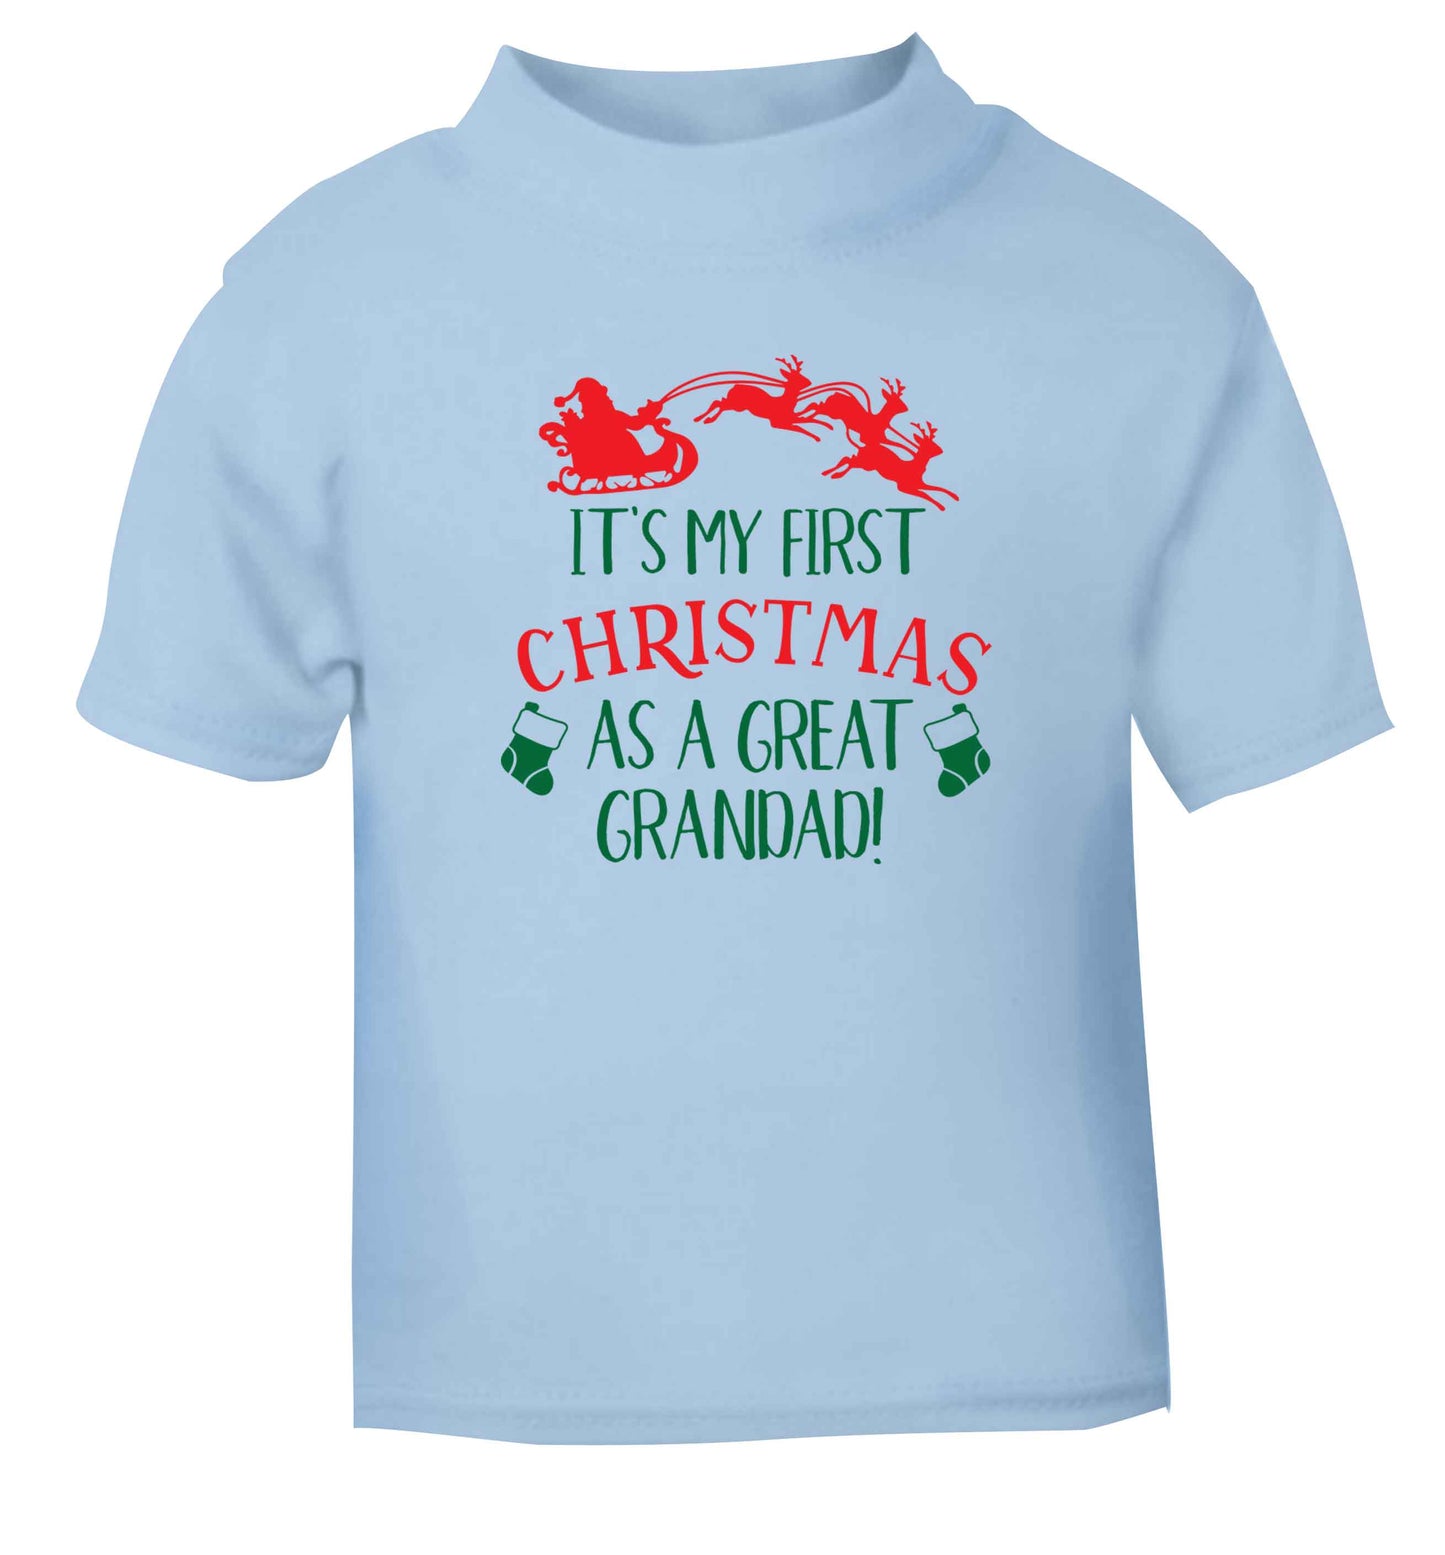 It's my first Christmas as a great grandad! light blue Baby Toddler Tshirt 2 Years